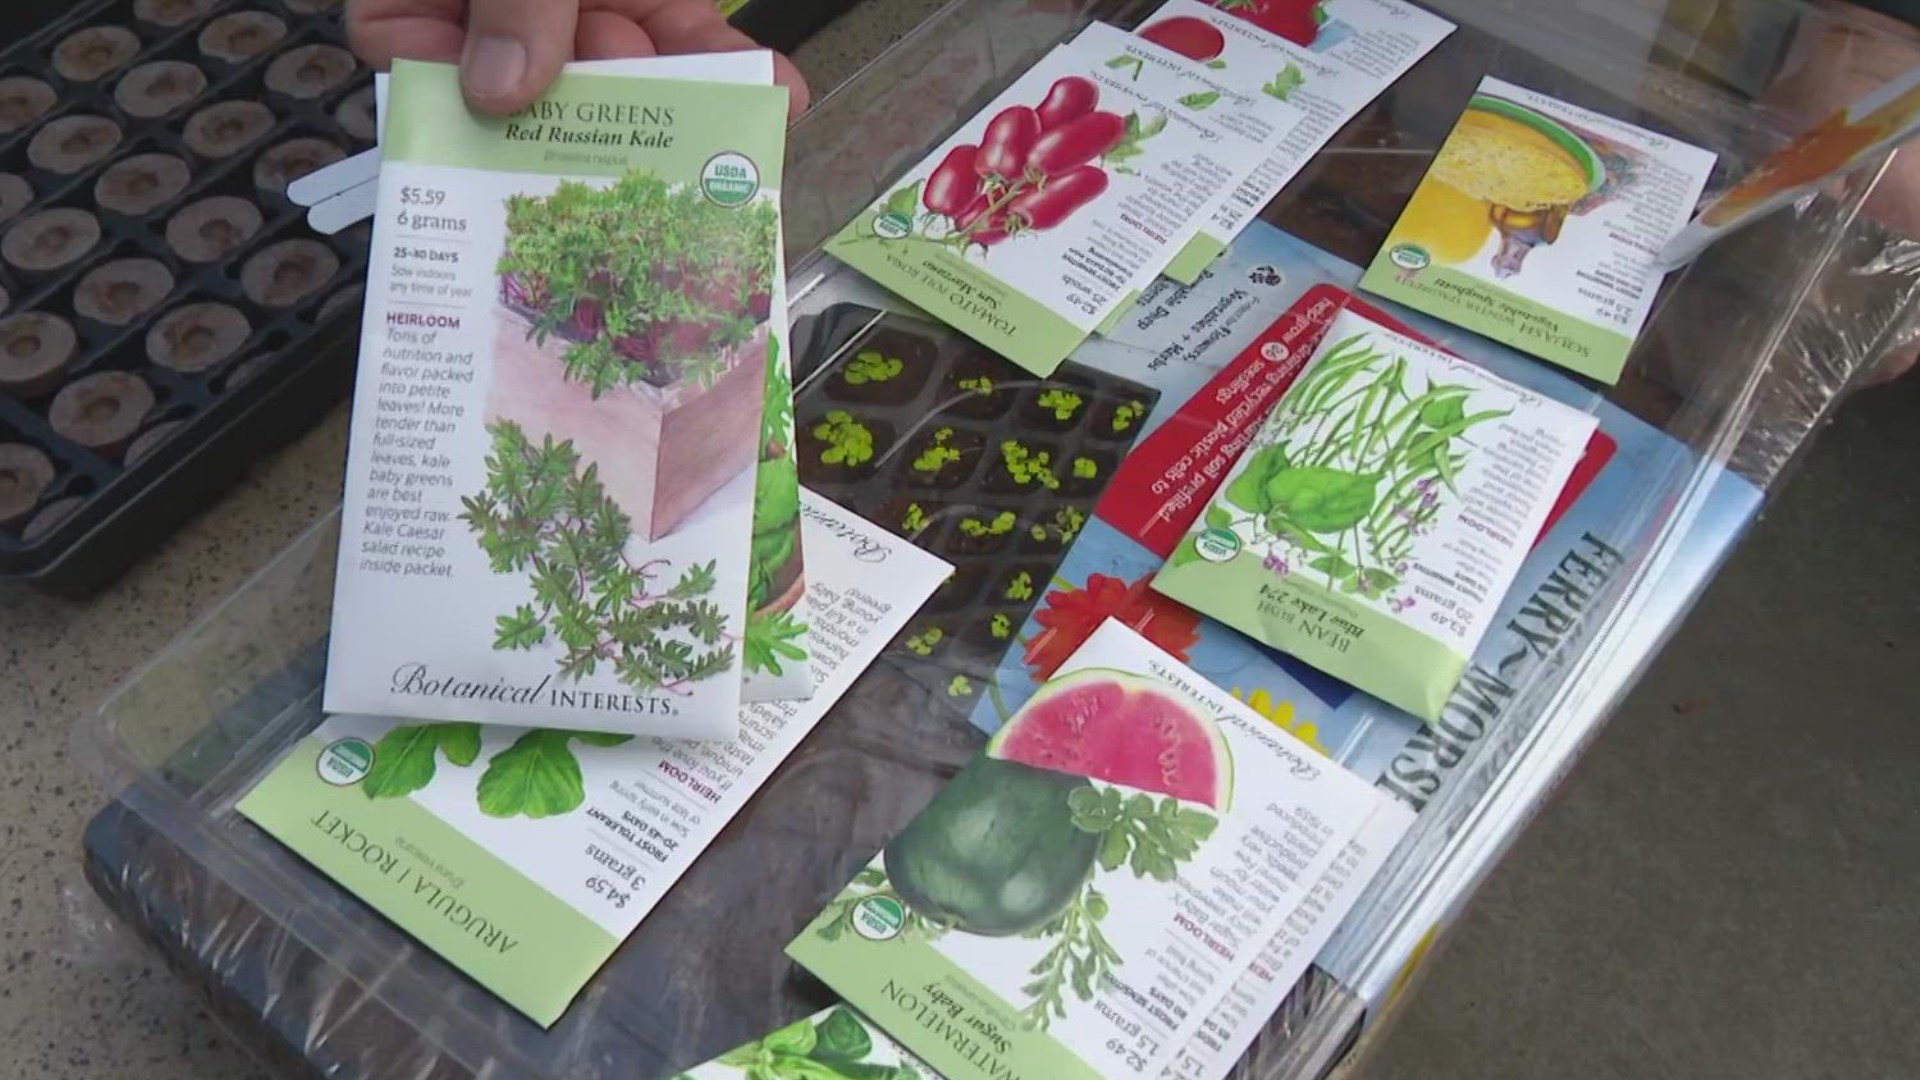 Starting seeds indoors now will allow you to plant the seedlings outdoors when warm weather arrives in the spring.